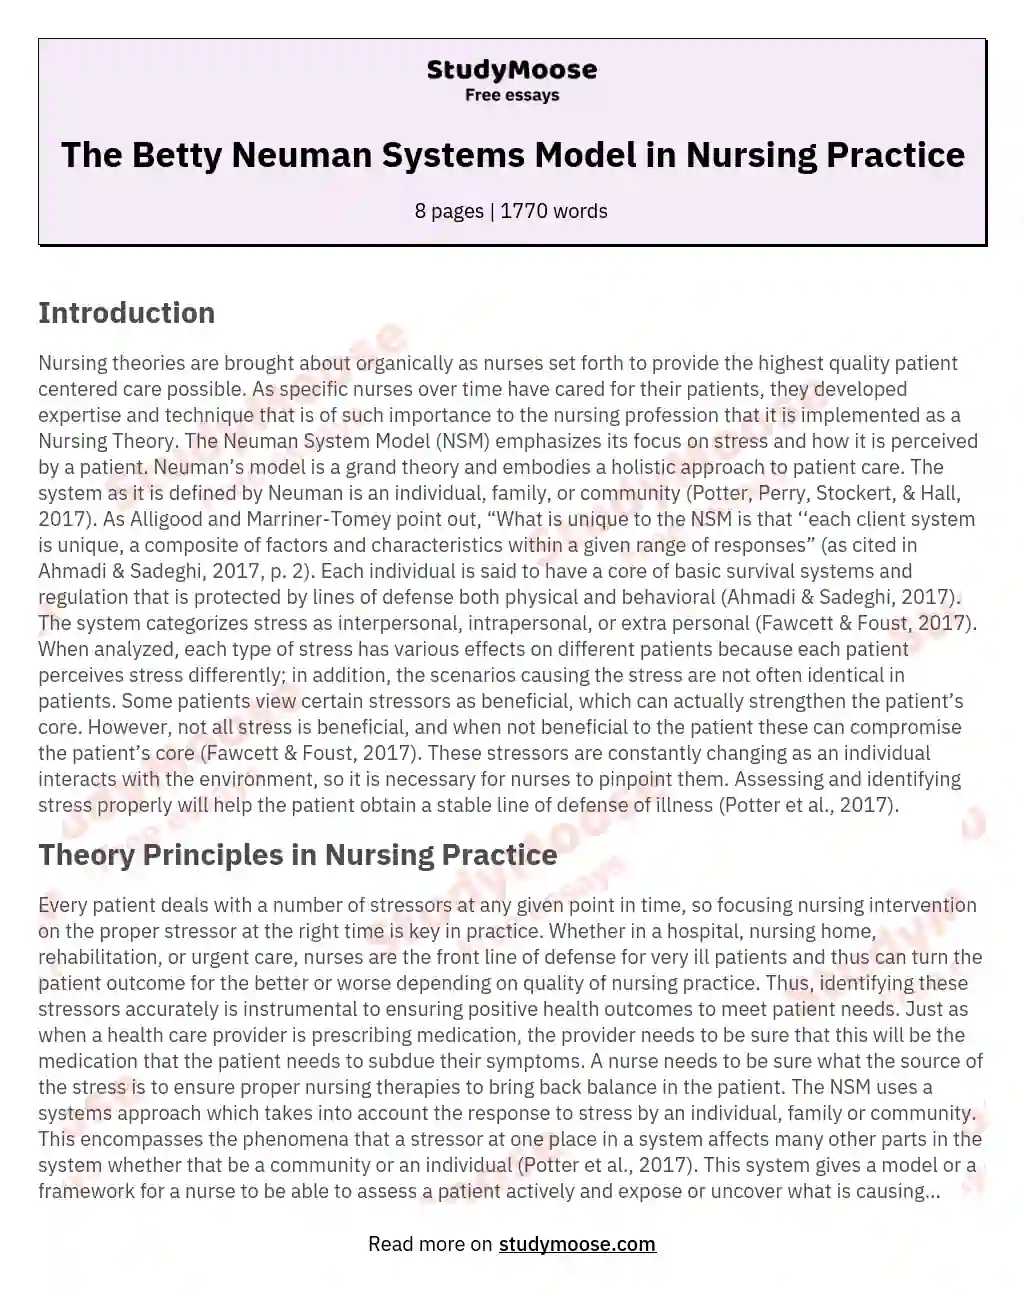 The Betty Neuman Systems Model in Nursing Practice essay